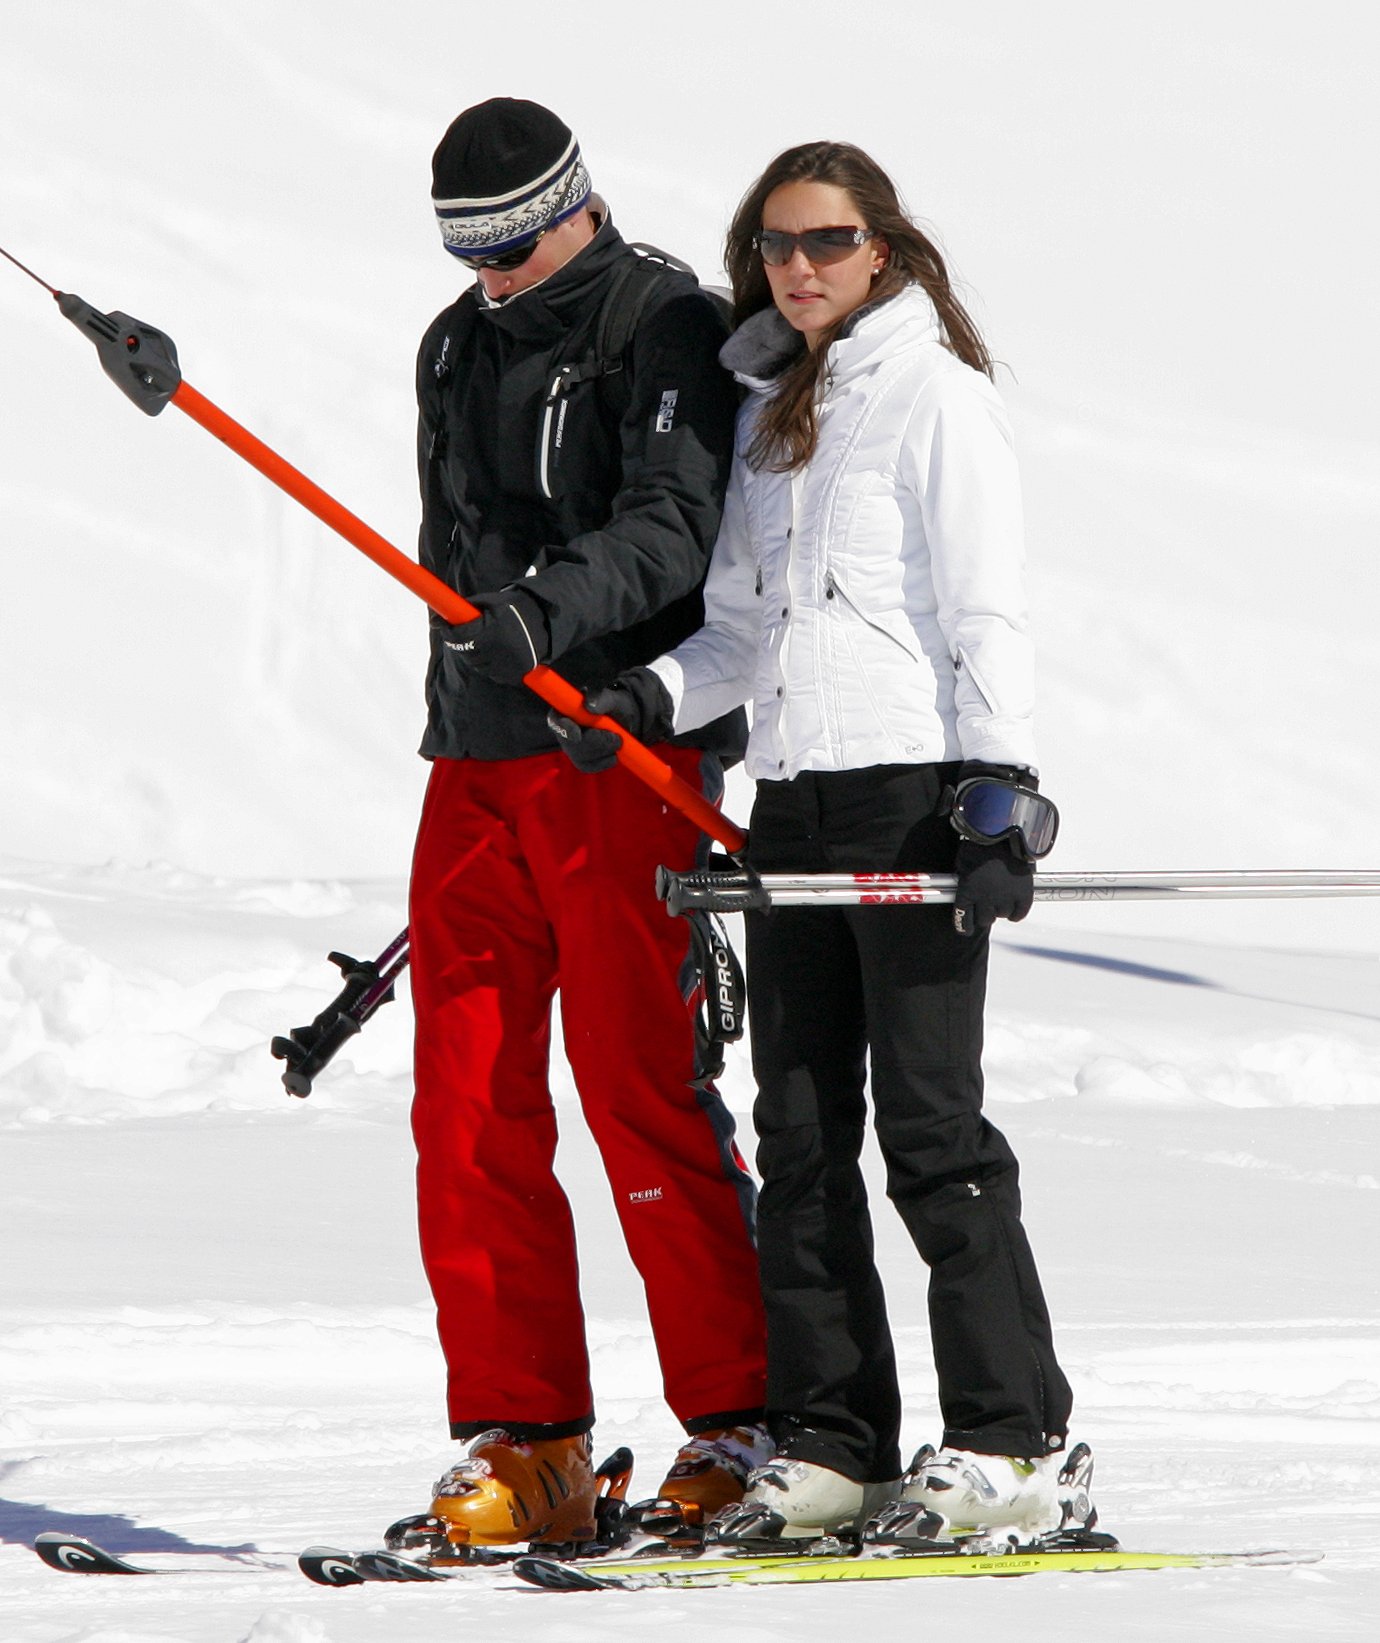 Prince William and then-girlfriend Kate Middleton use a T-bar drag lift whilst on a skiing holiday on March 19, 2008 in Klosters, Switzerland | Source: Getty Images